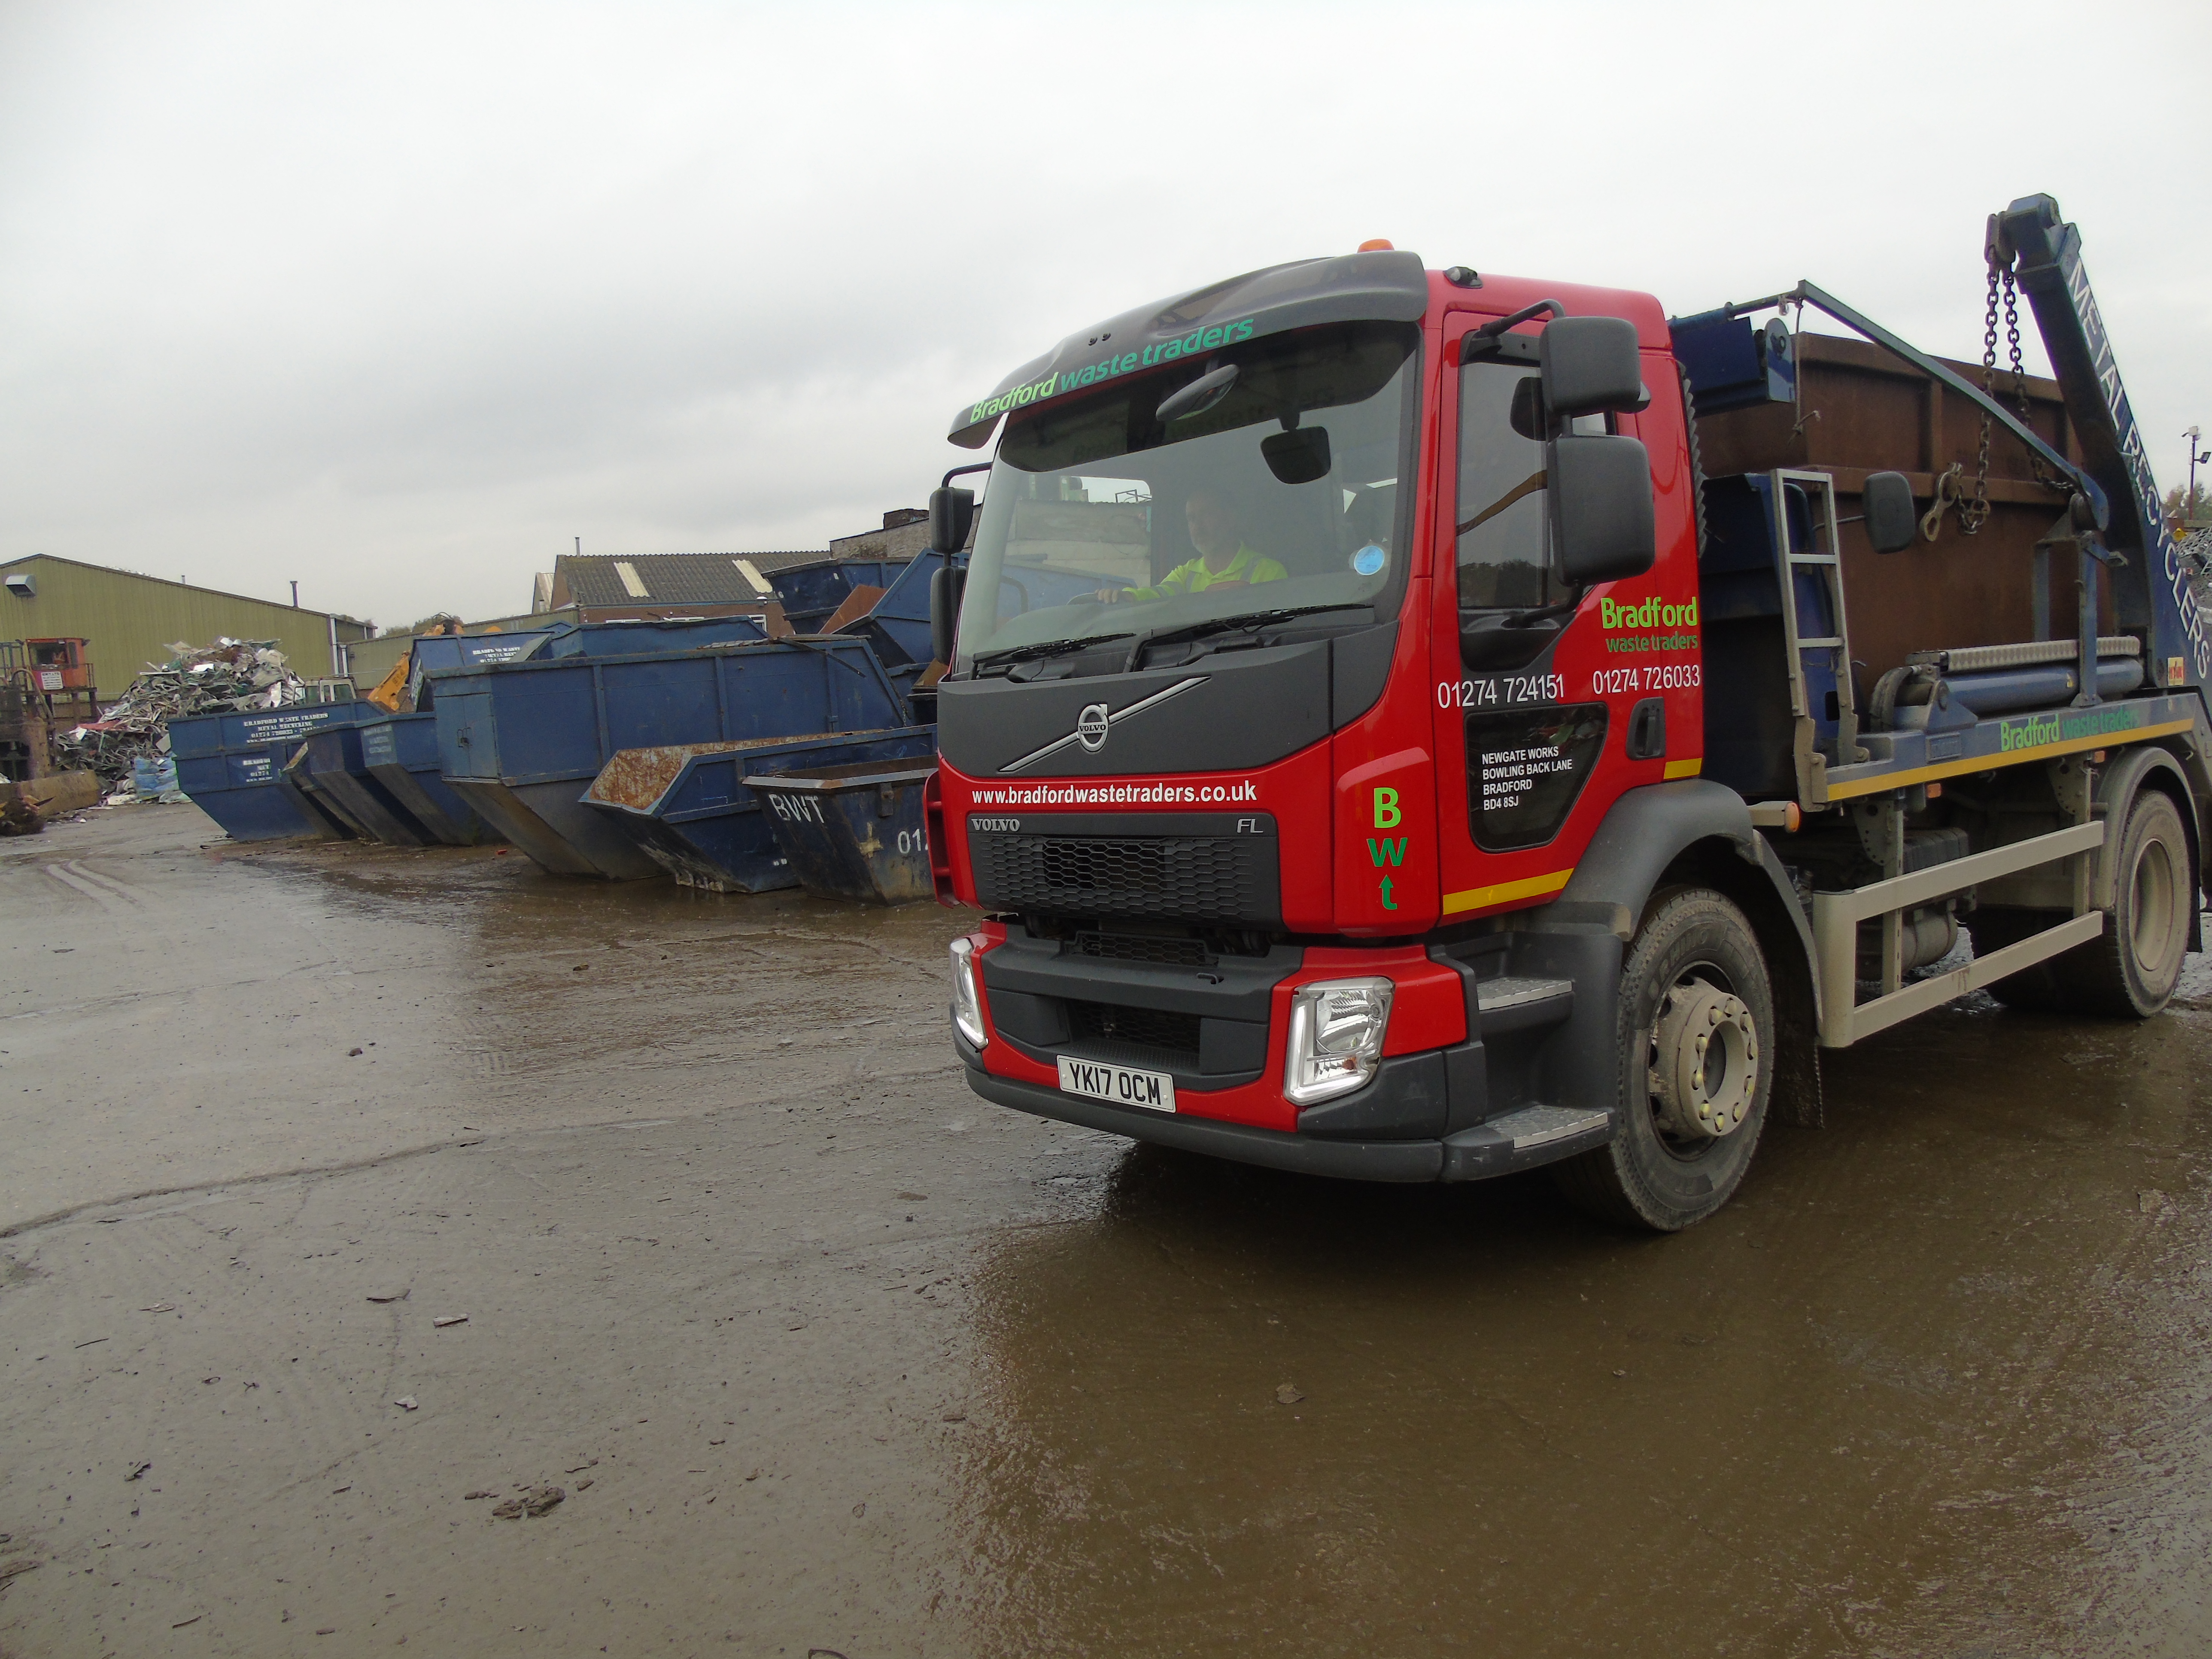 Truck carrying skip, skips in background